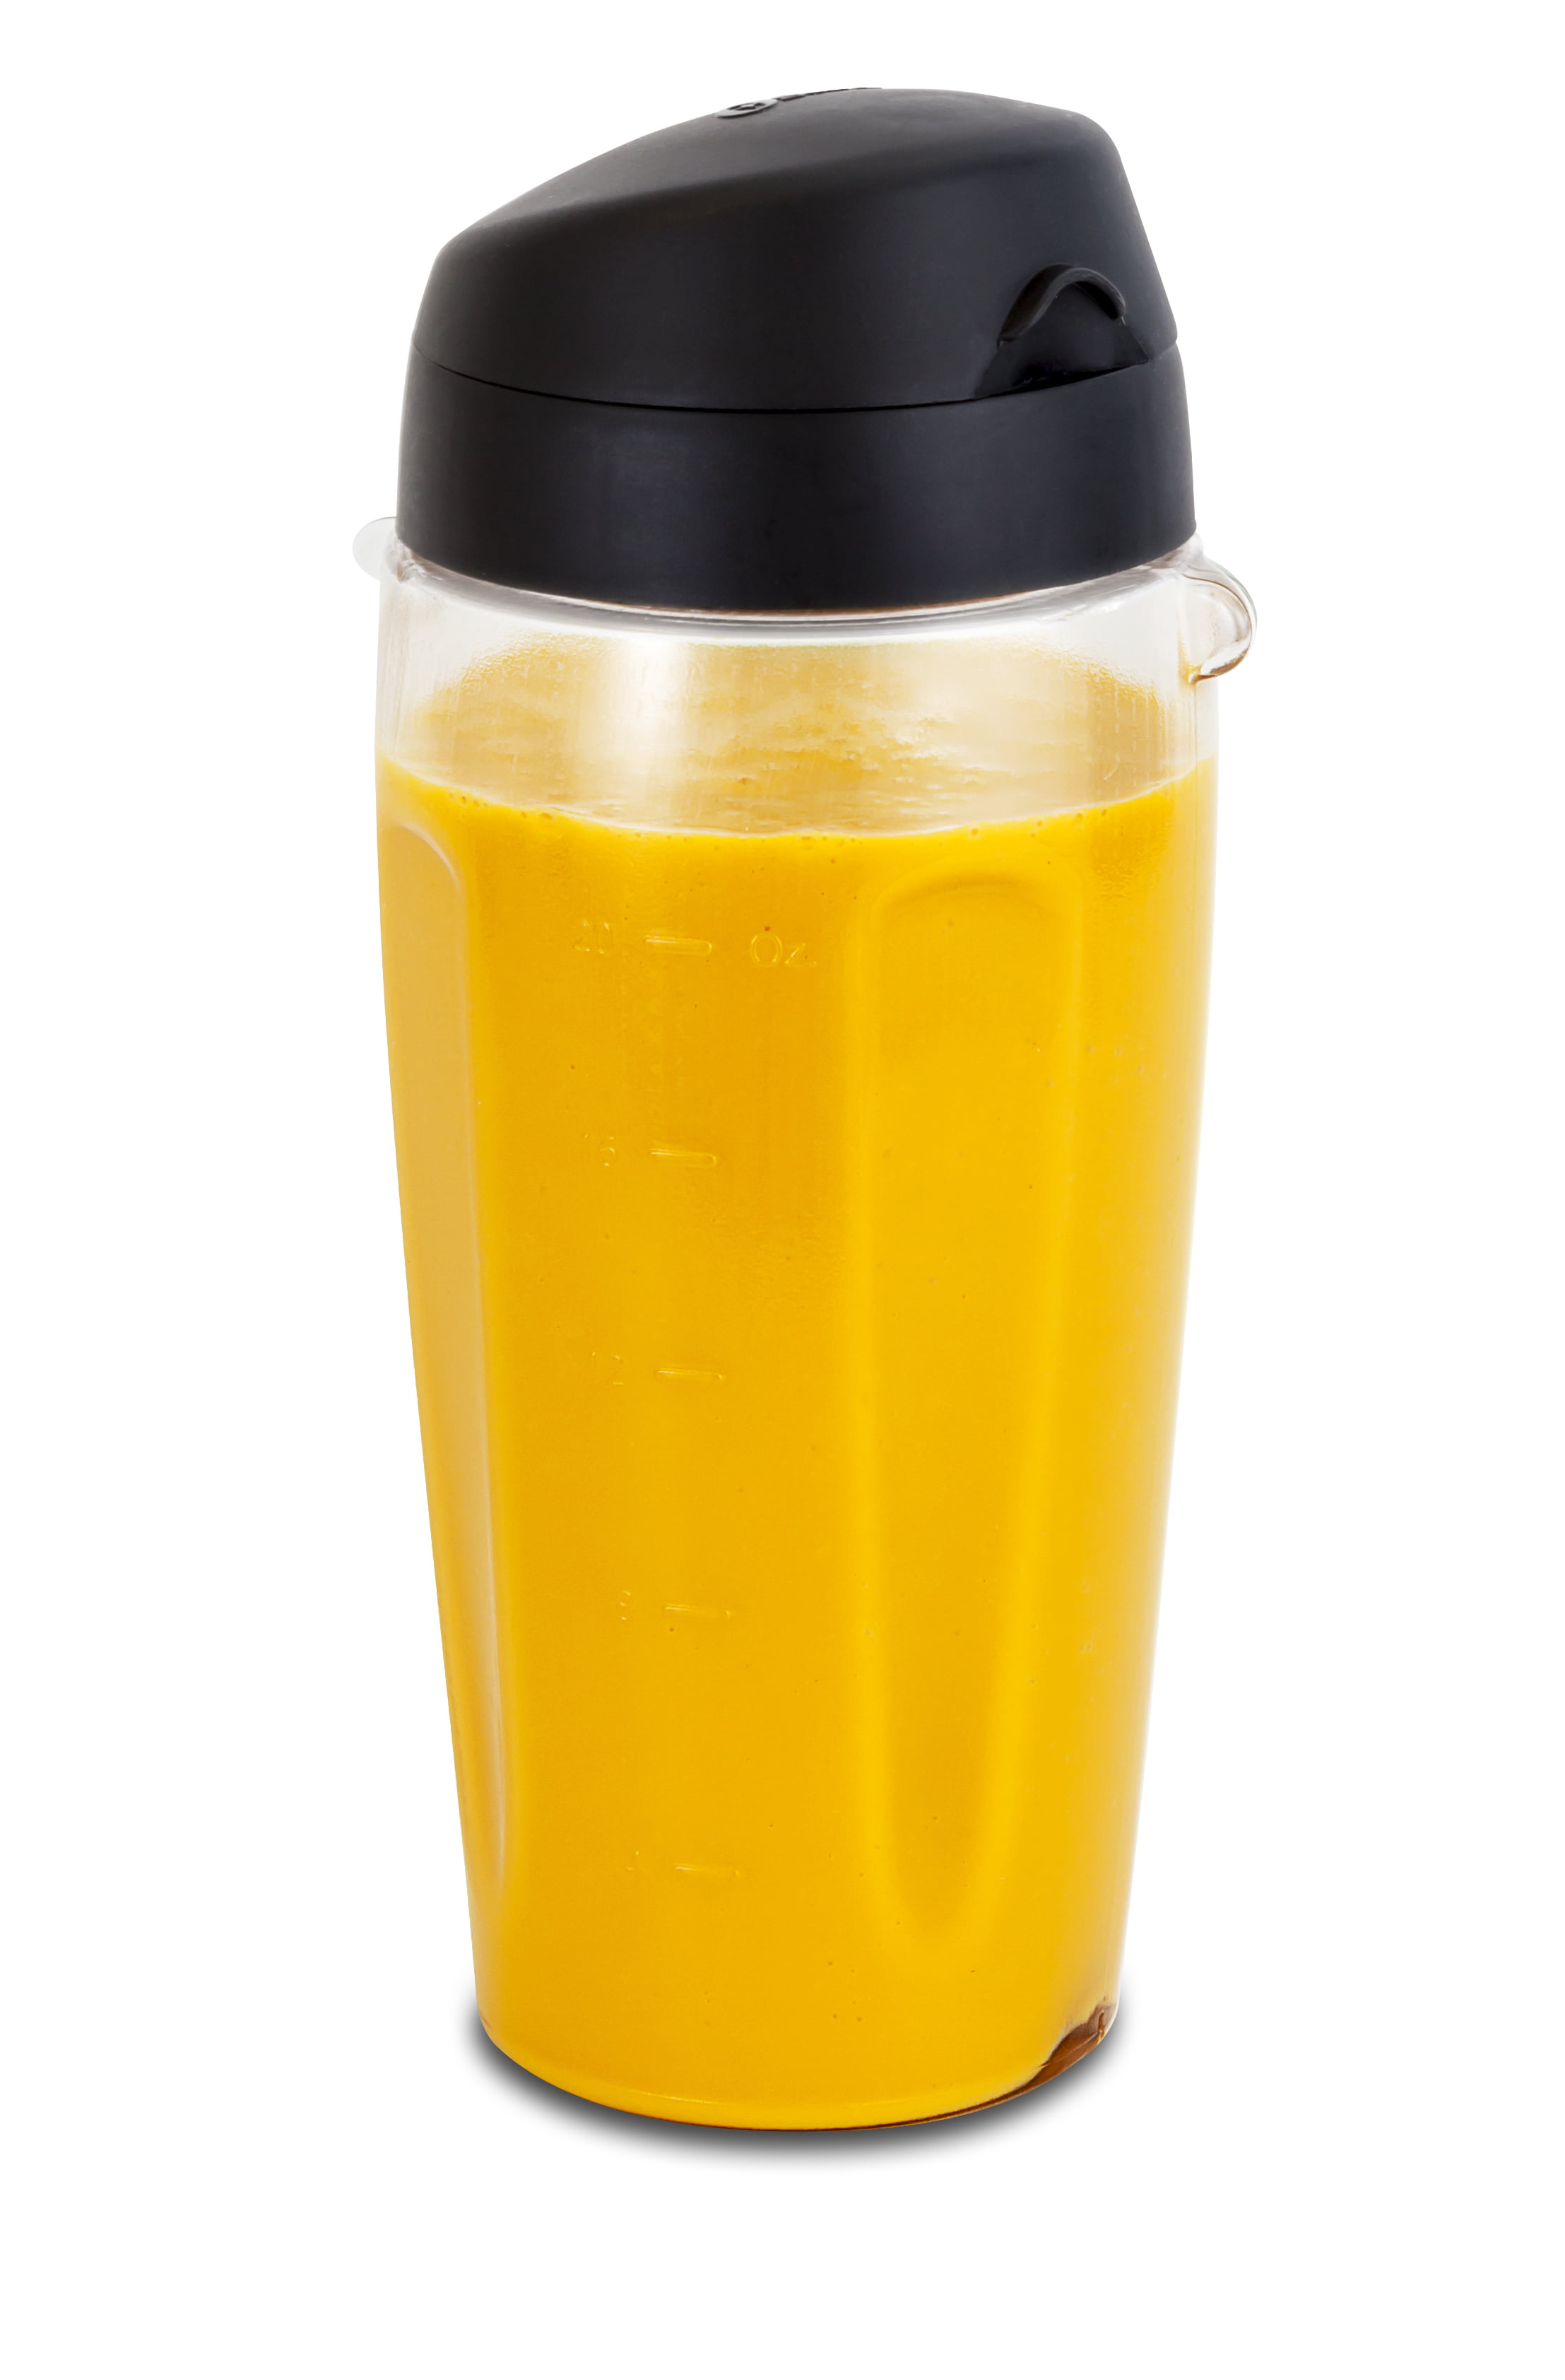 Oster Classic Series 8-Speed Blender with Smoothie Cup - 1